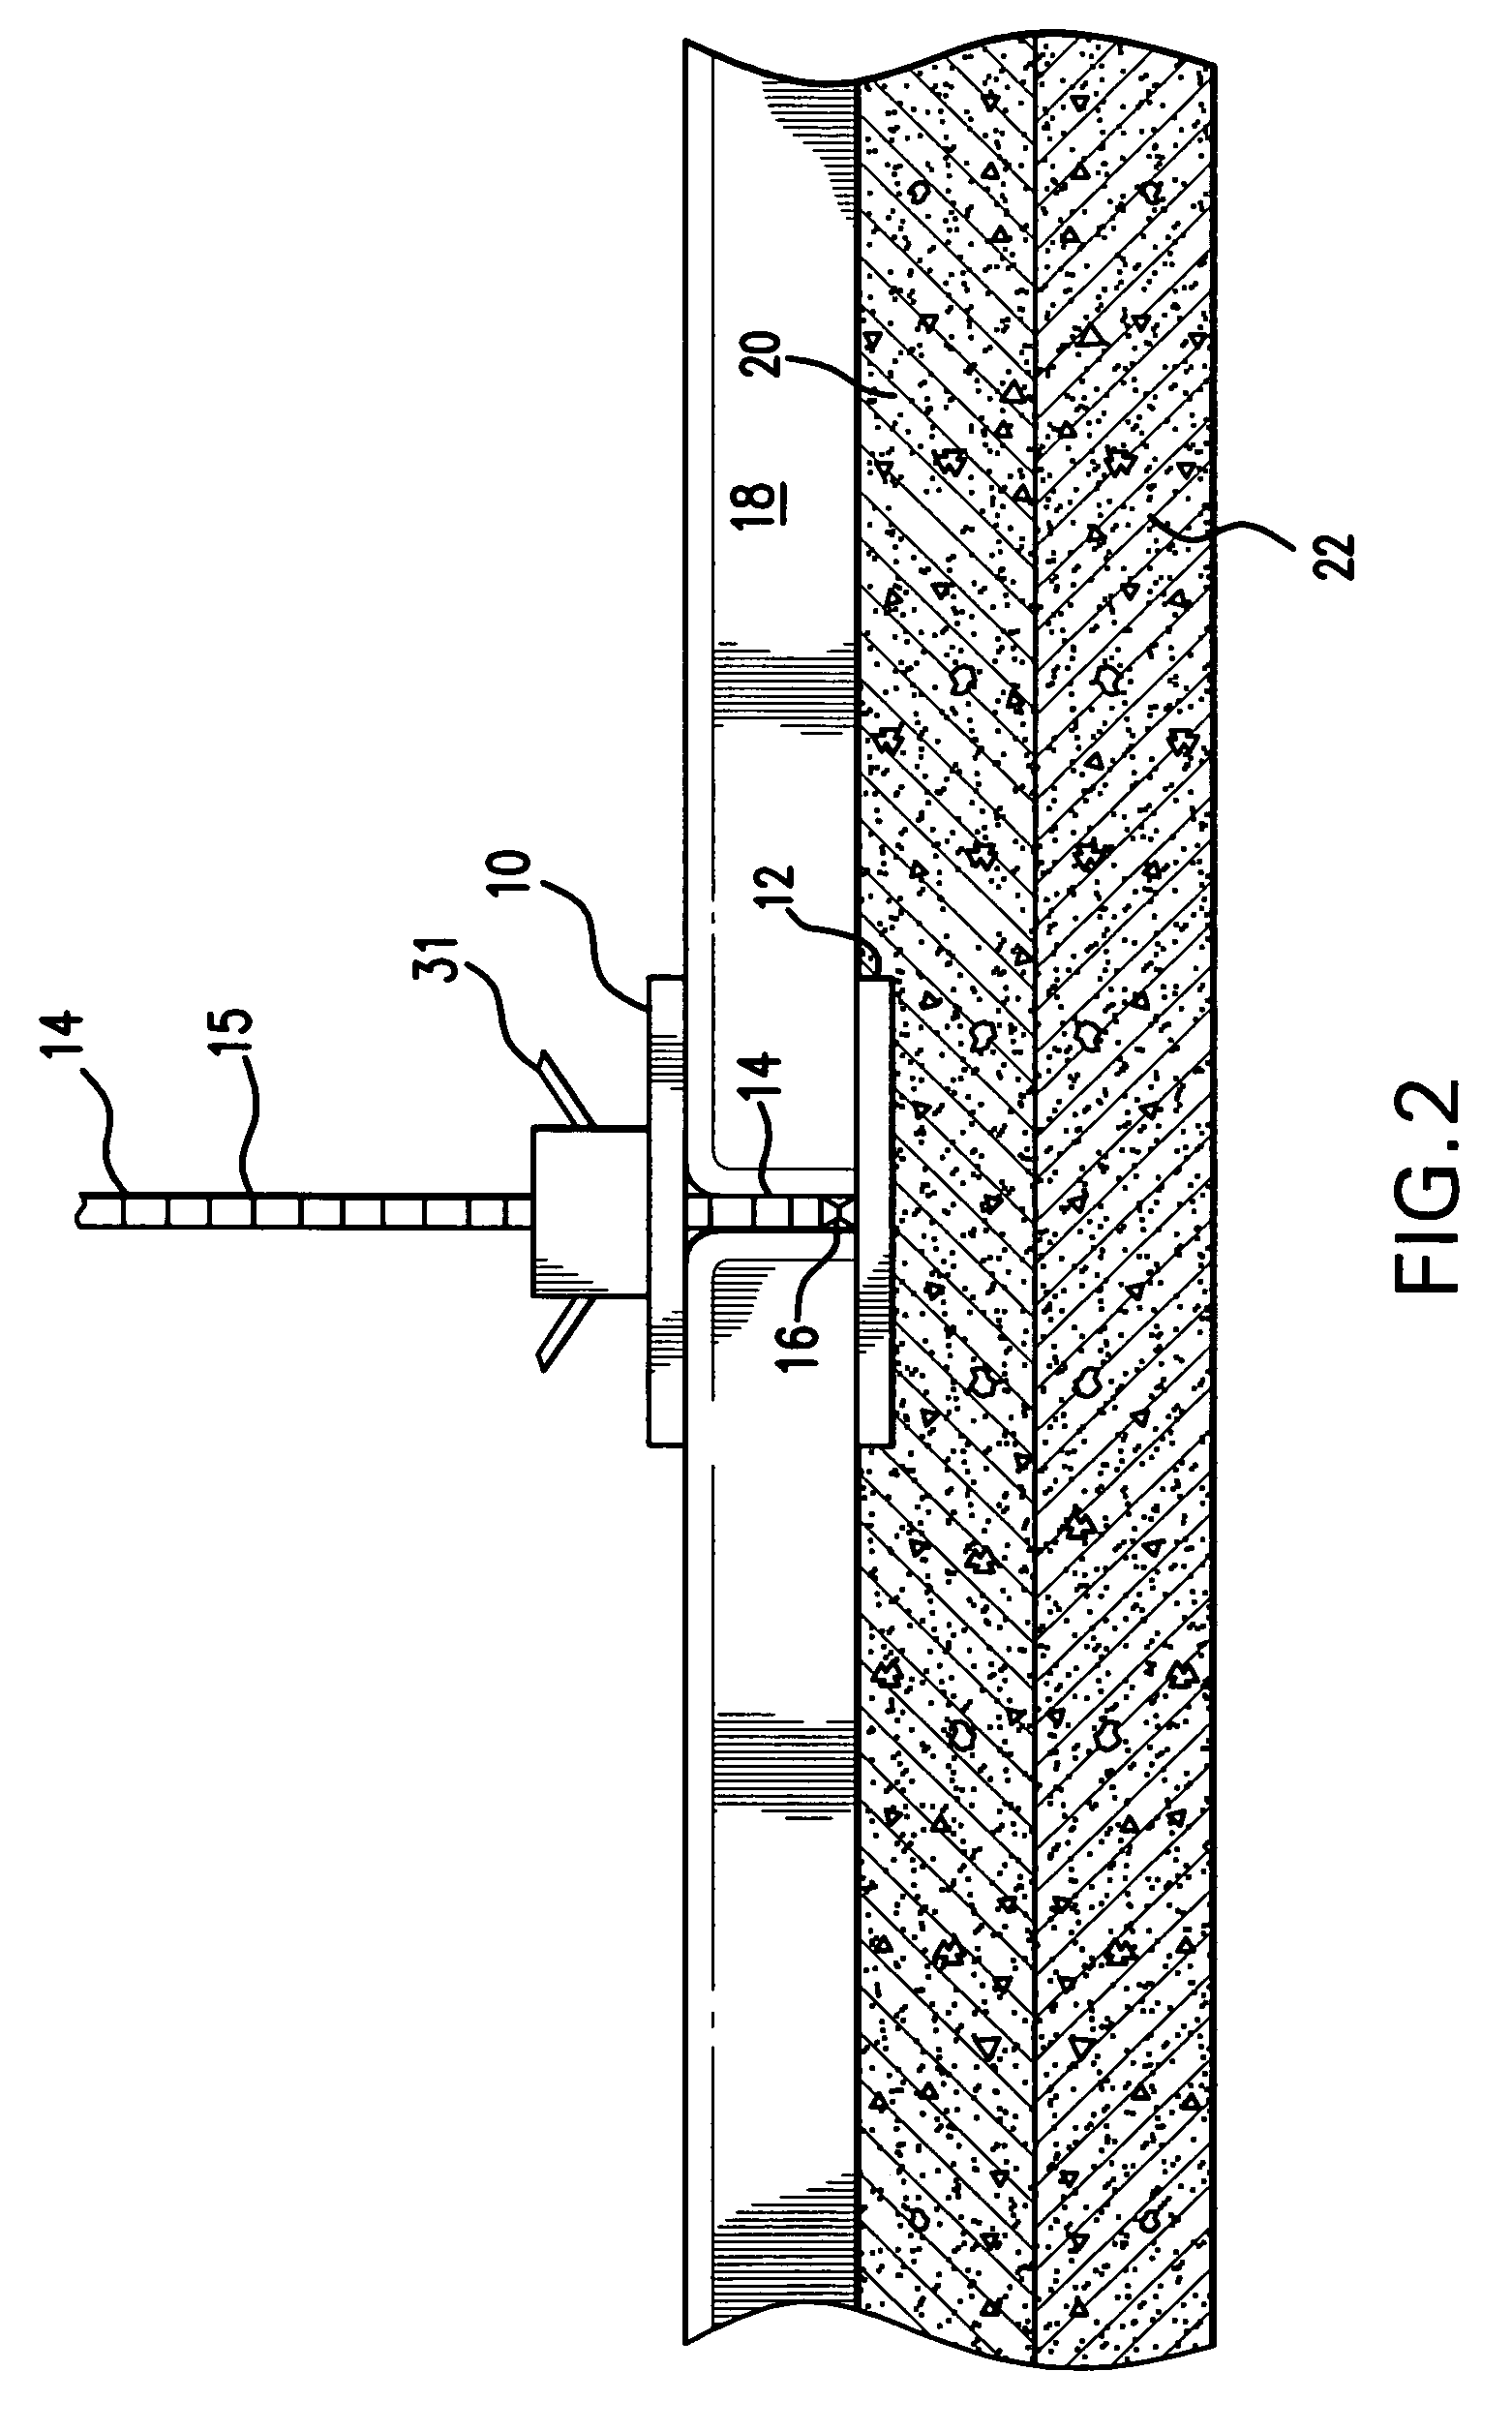 Tile alignment and leveling device and method for using the same